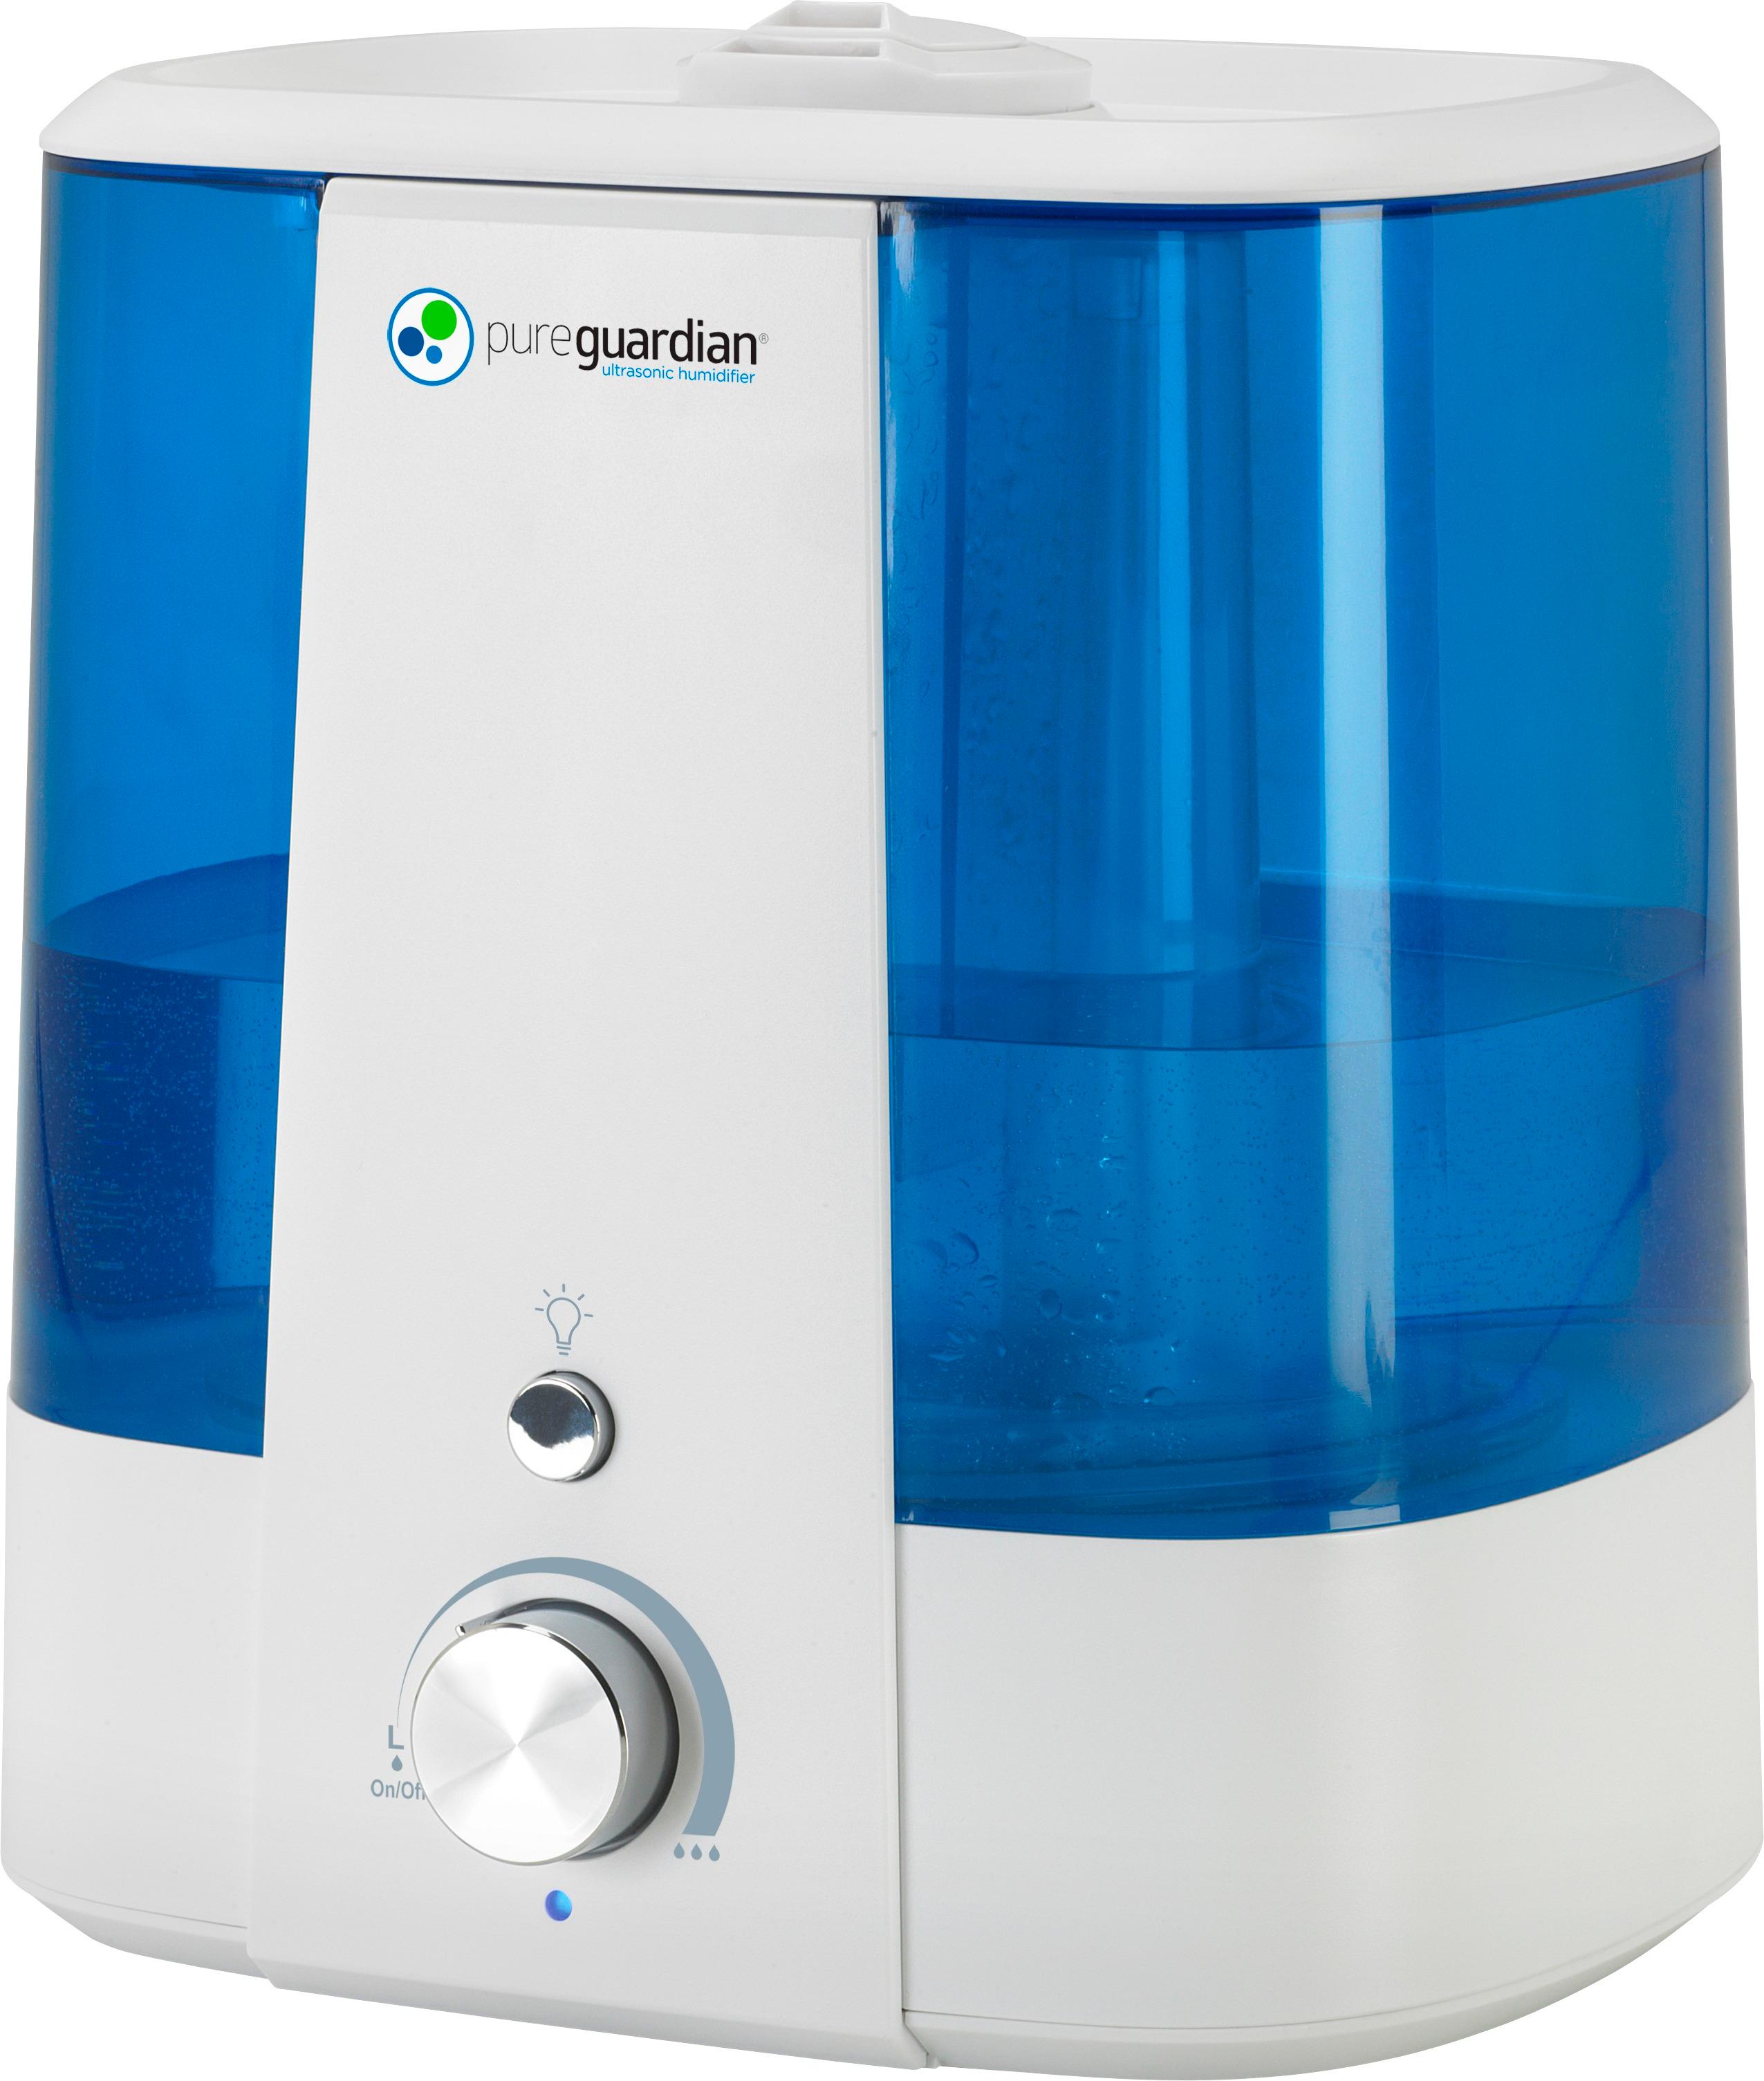 Left View: SPT - Ultrasonic 0.6 Gal. Cool Mist Humidifier - Royal Blue